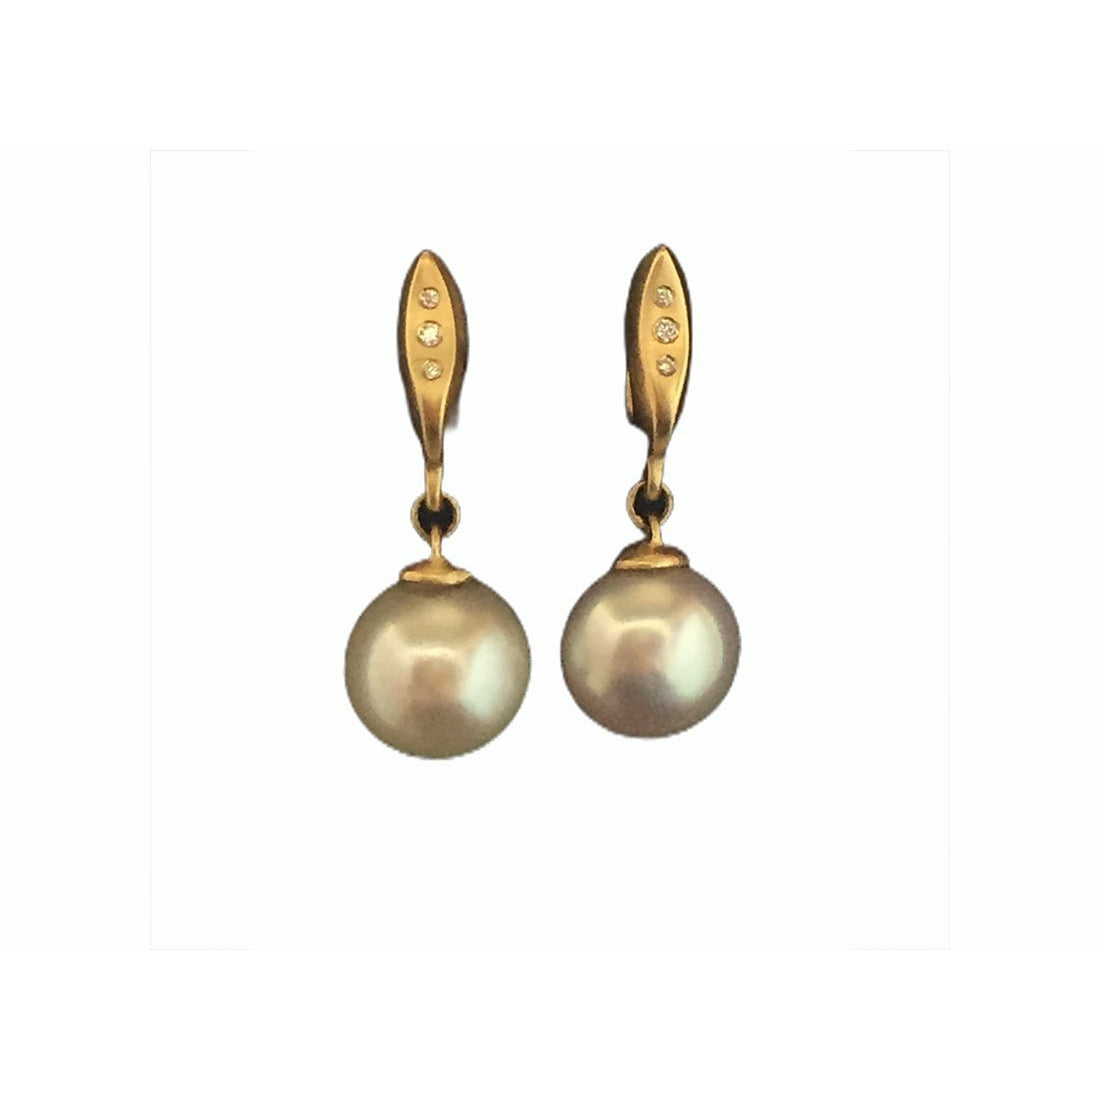 Add a touch of elegance to your ensemble with these stunning Button Diamond  Pearl Earrings. Crafted with high-quality Japanese pearls, these earrings exude sophistication and timeless beauty. Elevate your style and make a statement with these exquisite earrings.  Ear piece 10mm  3 x 1 pointer diamonds  8mm -10mm Japanese pearls  Need different material, stone, 